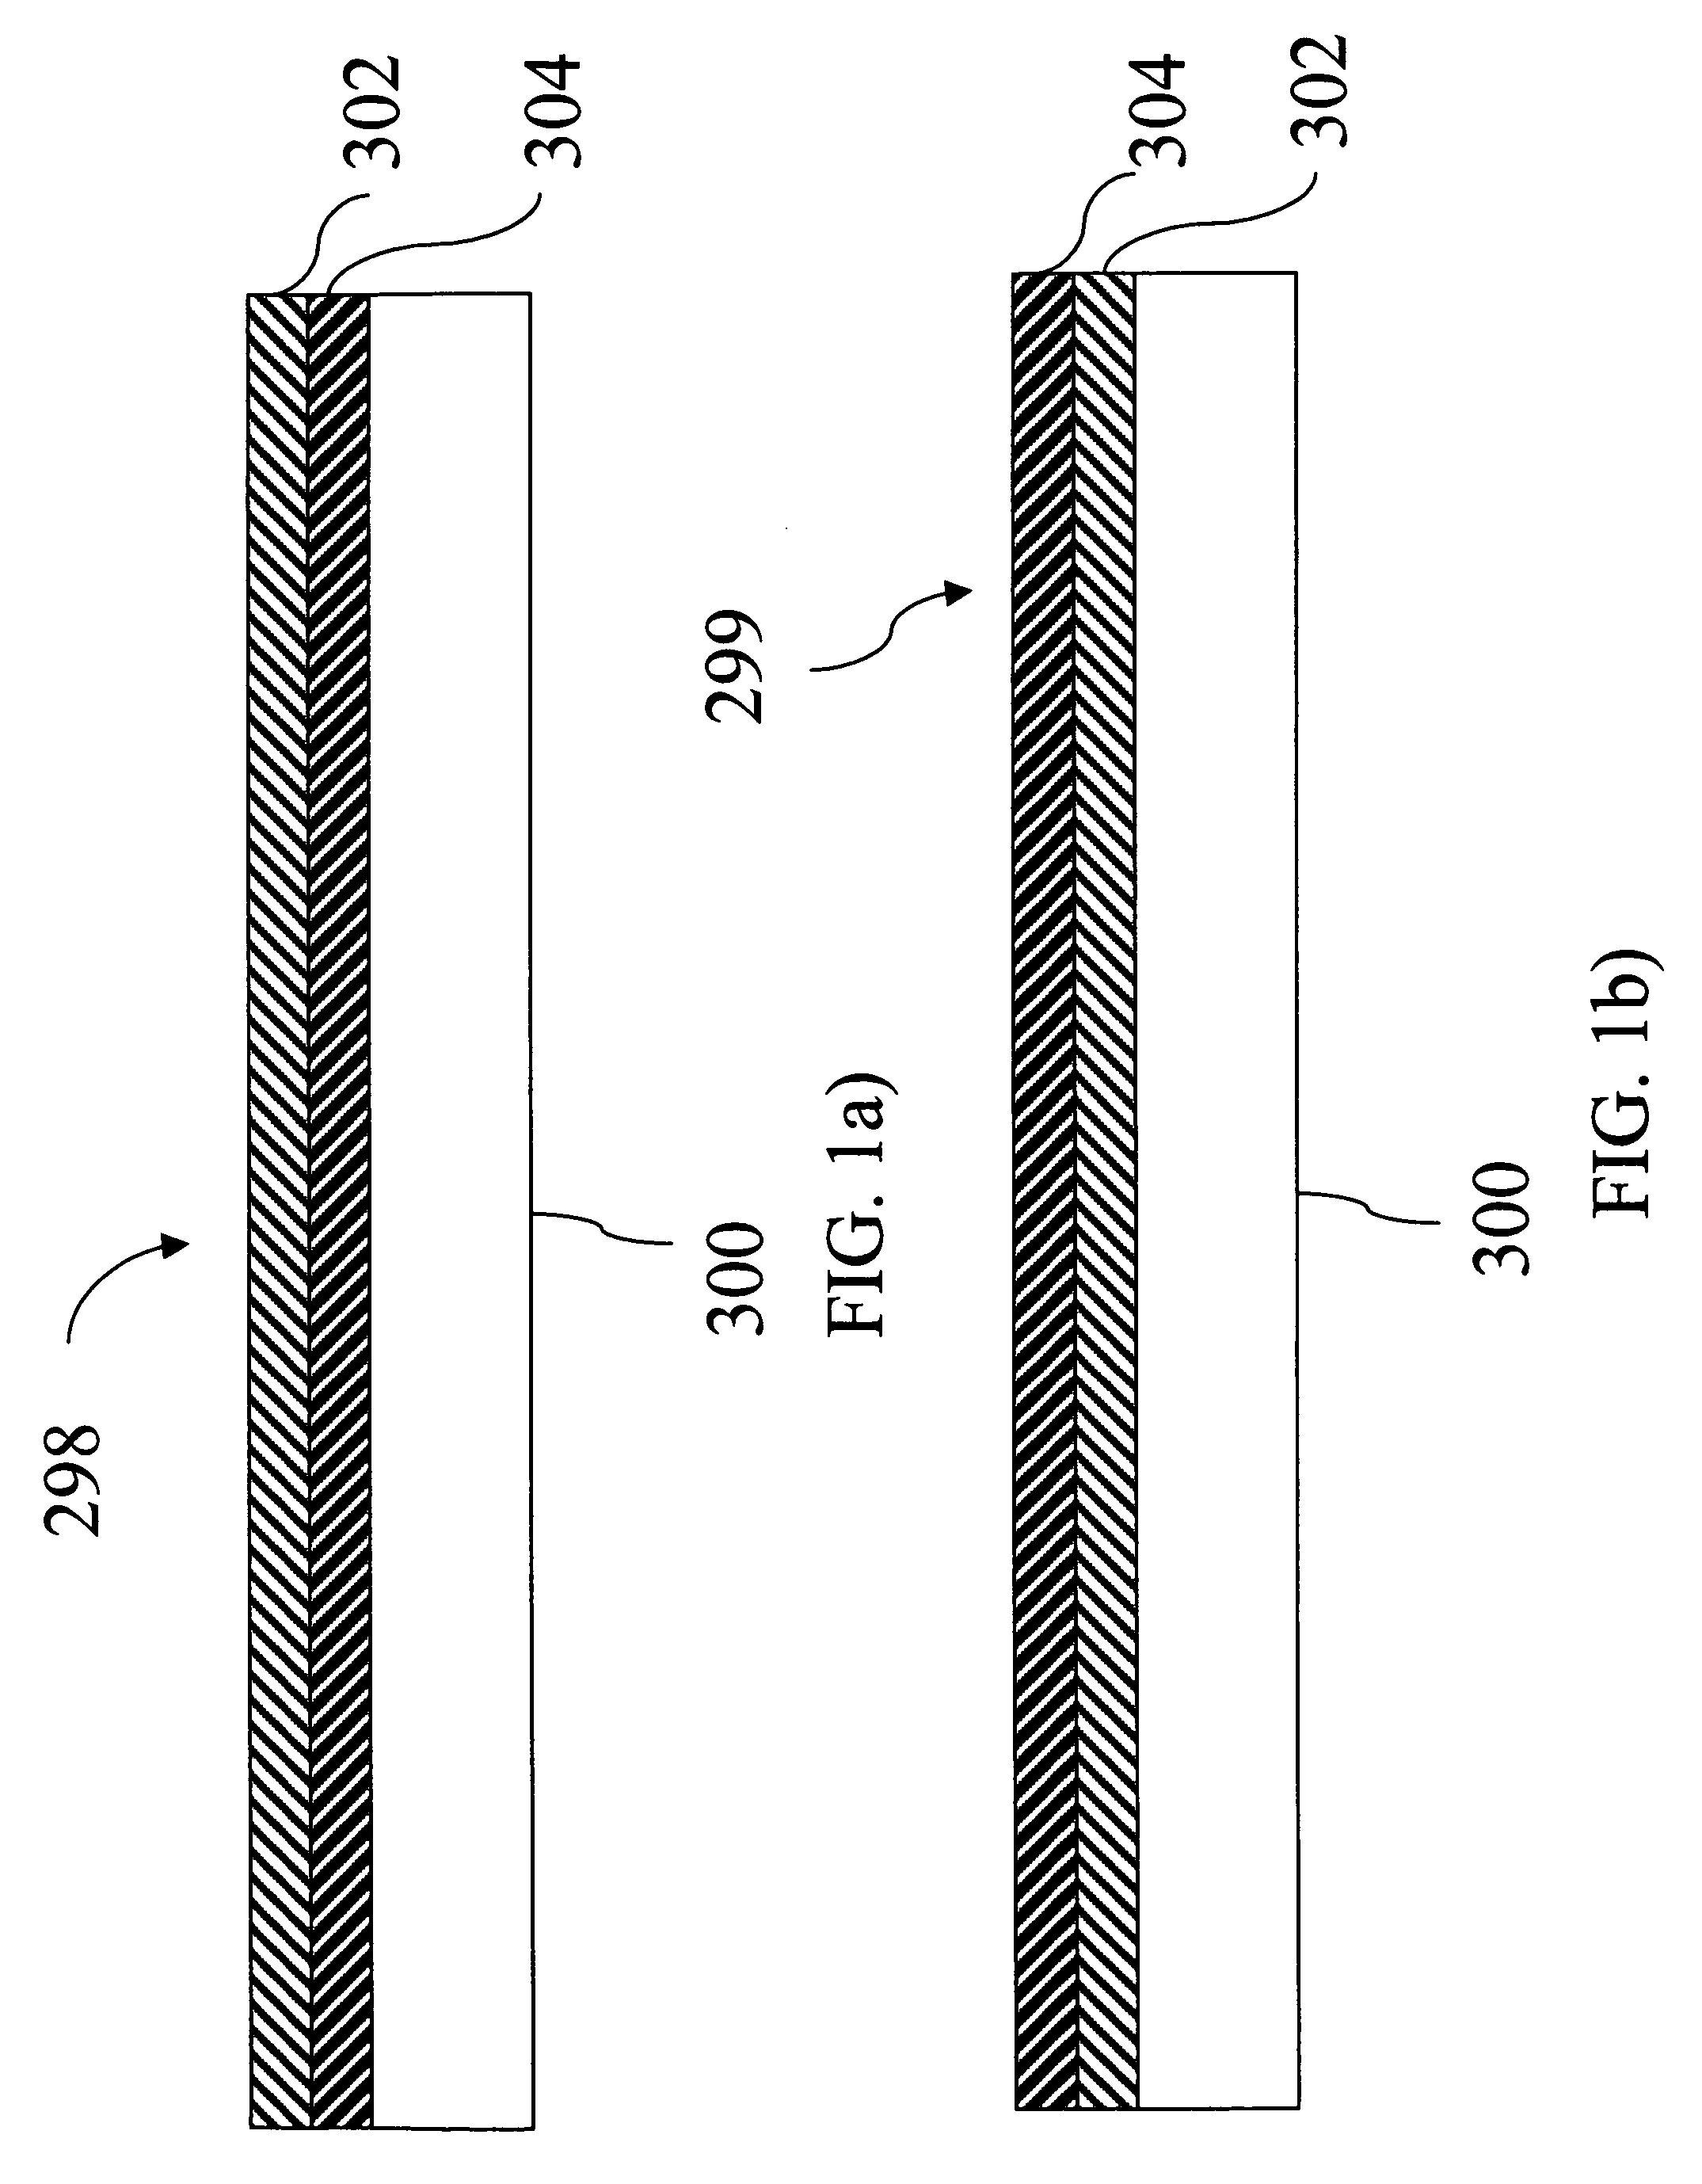 Multi-layer conductor with carbon nanotubes